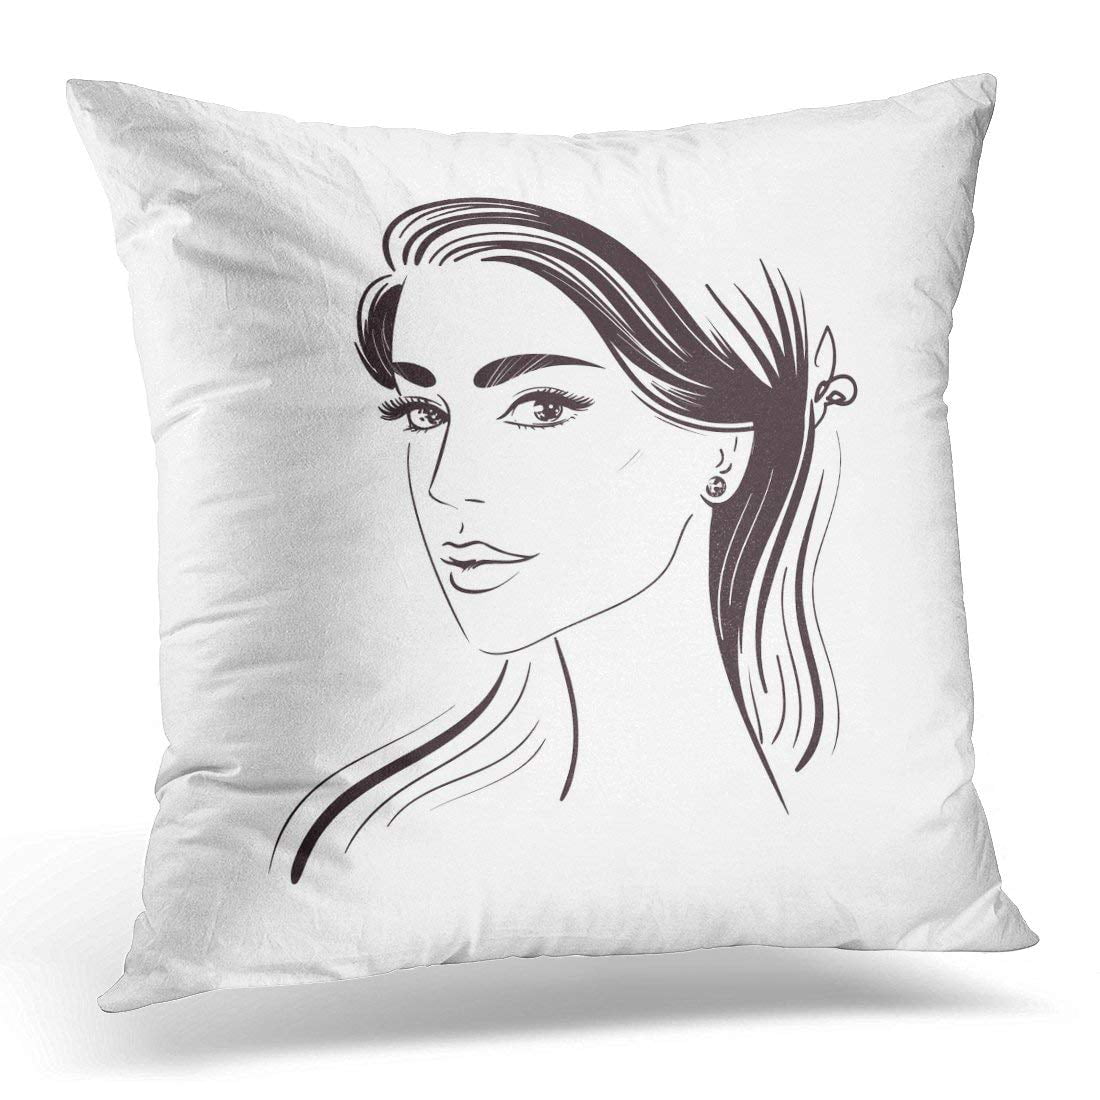 Multicolor FRESAN 18x18 I'd Rather Be A Mermaid Nixie Mythical Creature Siren-I'd Rather Be A Mermaid Throw Pillow 